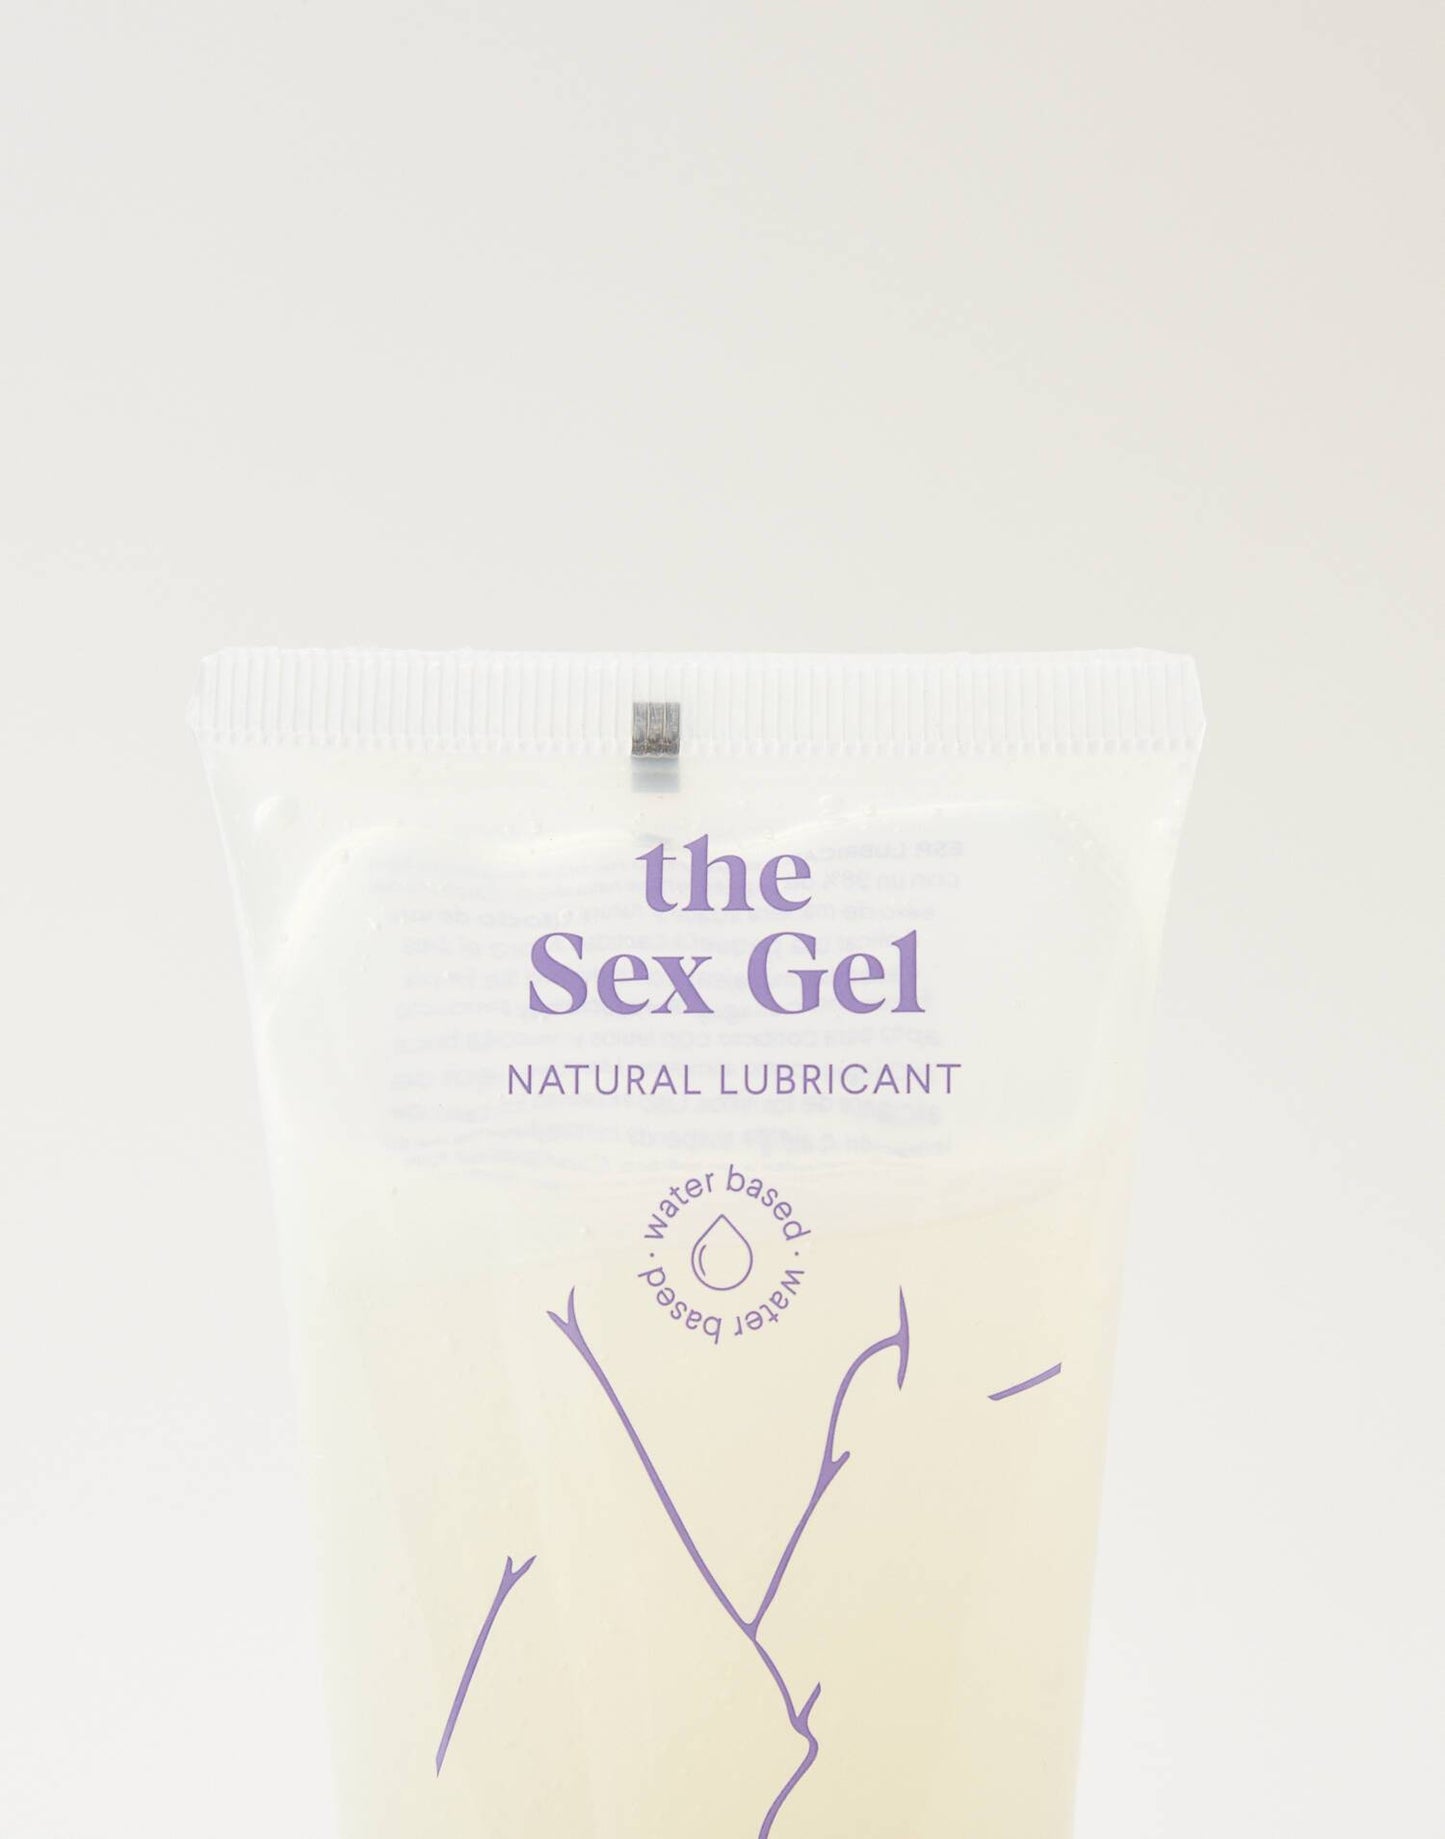 Natural lubricant